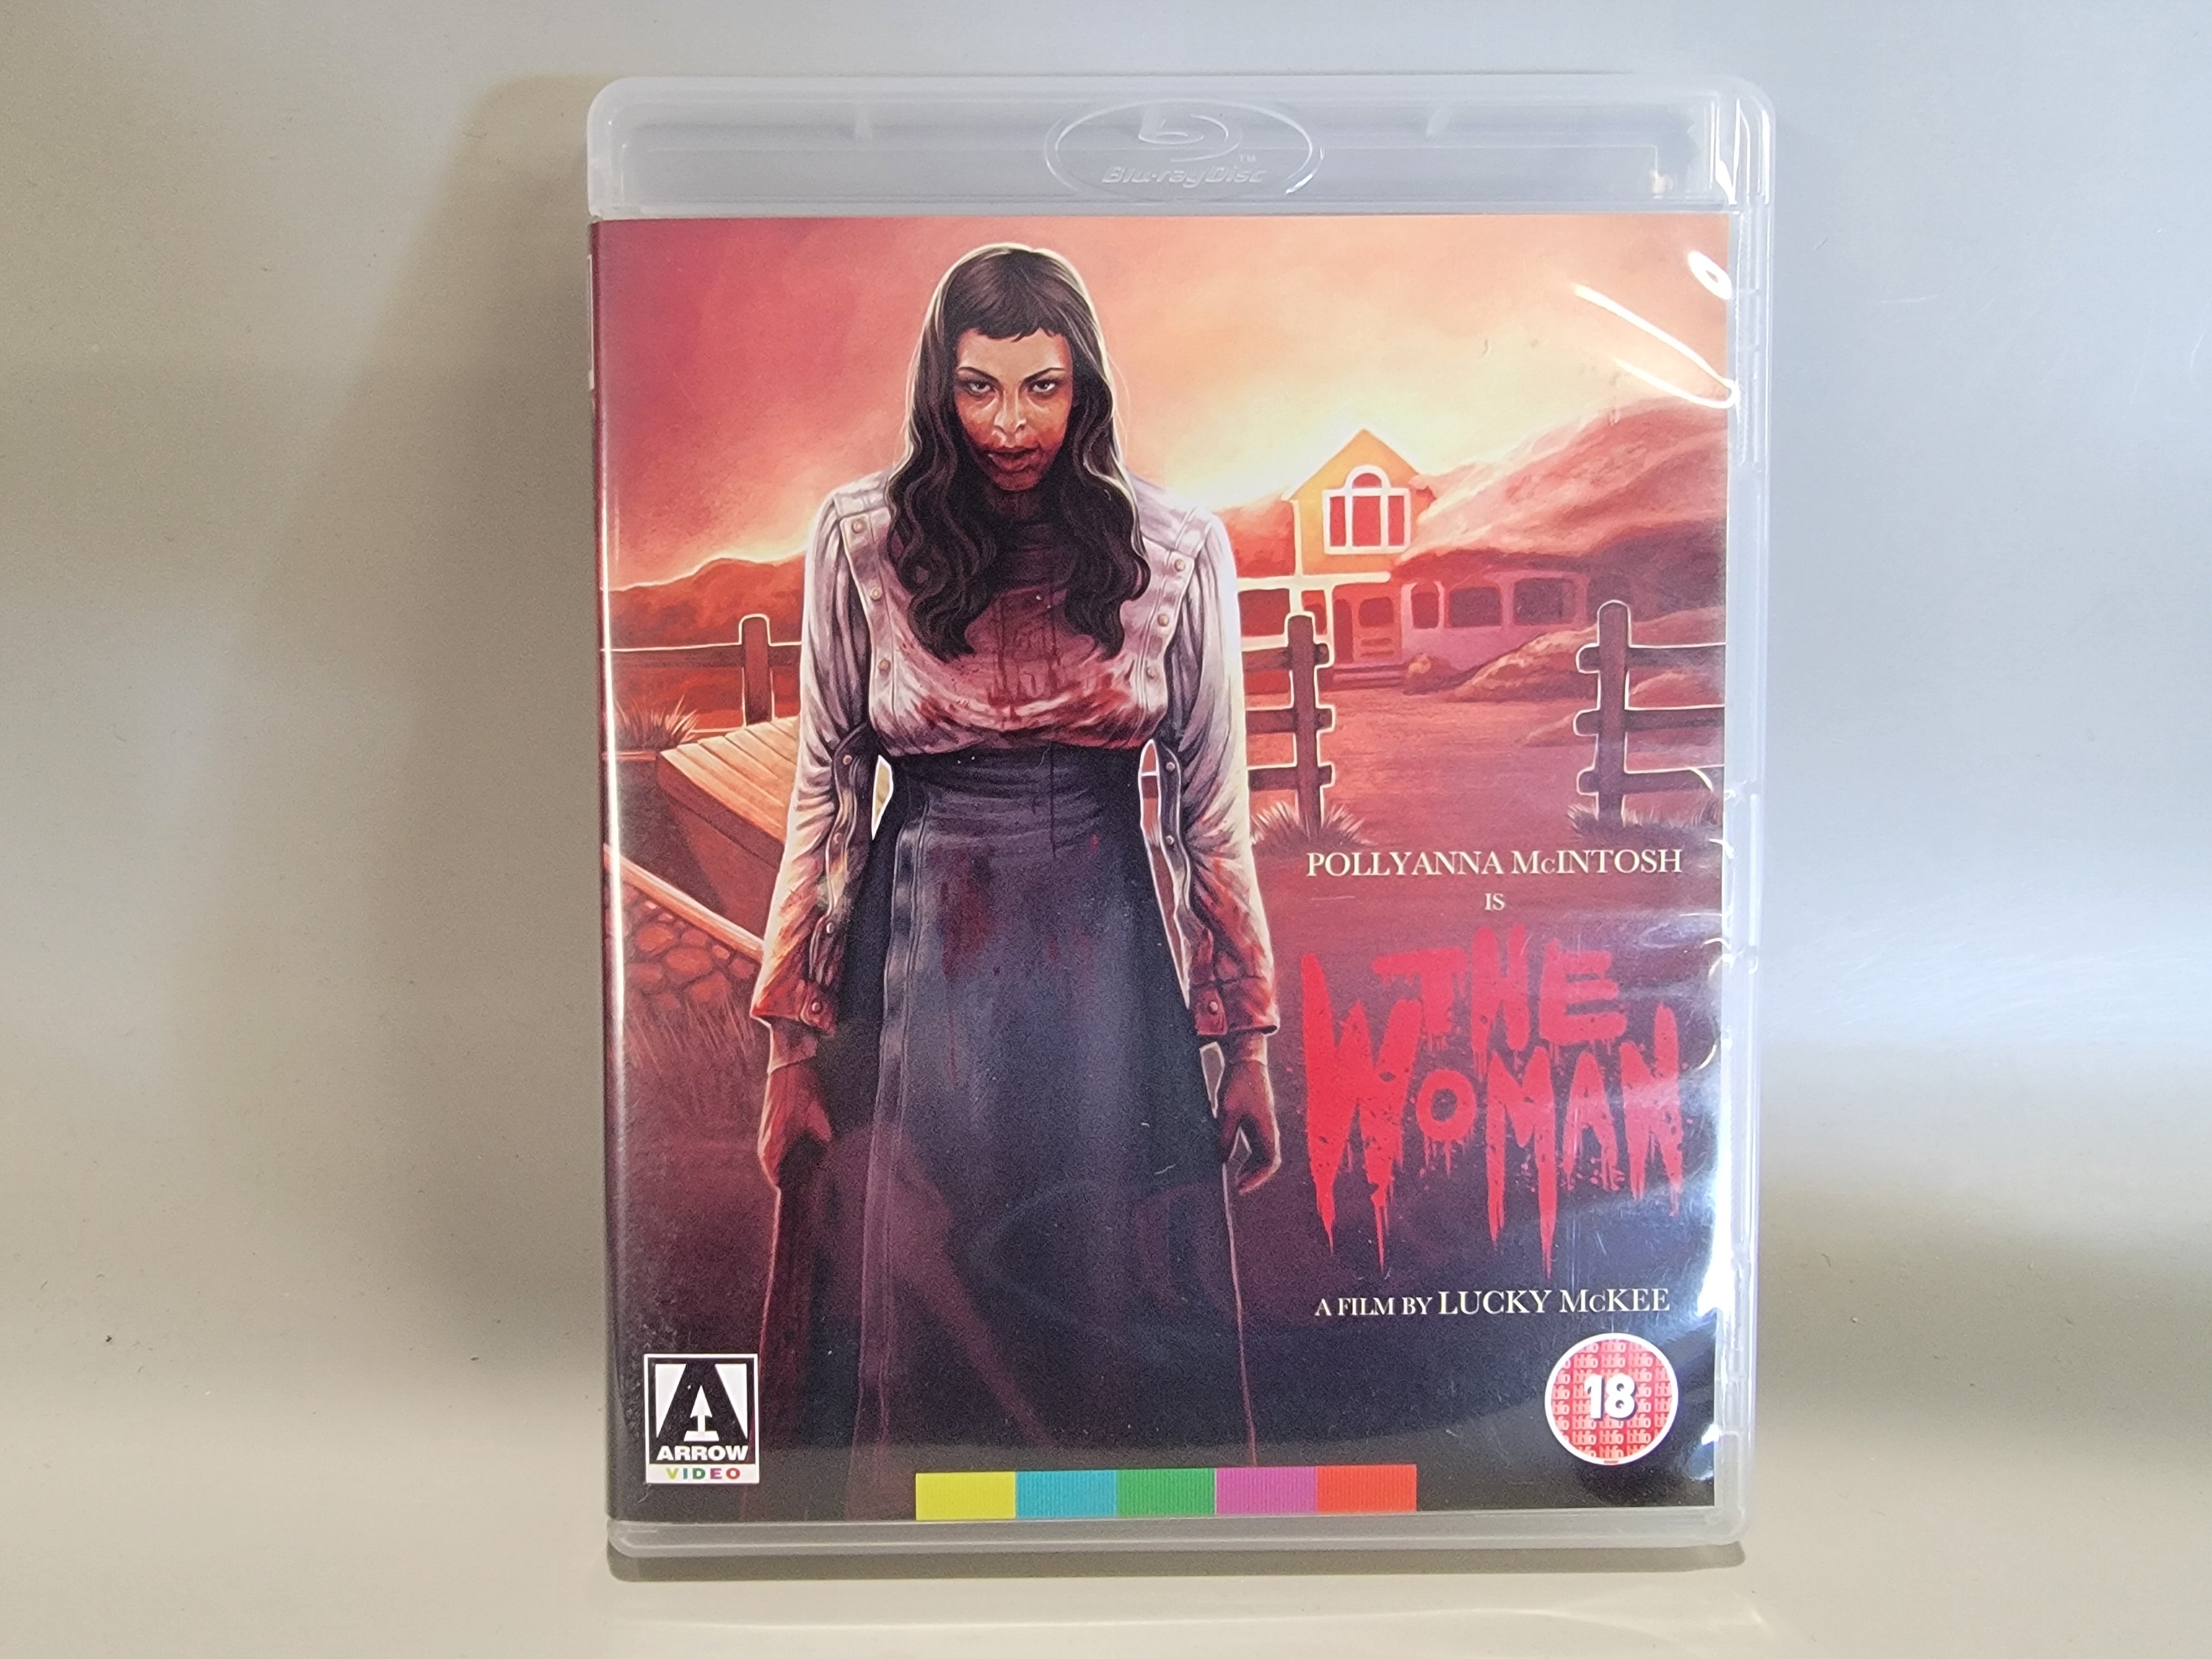 THE WOMAN / OFFSPRING (REGION B IMPORT - LIMITED EDITION) BLU-RAY [USED]